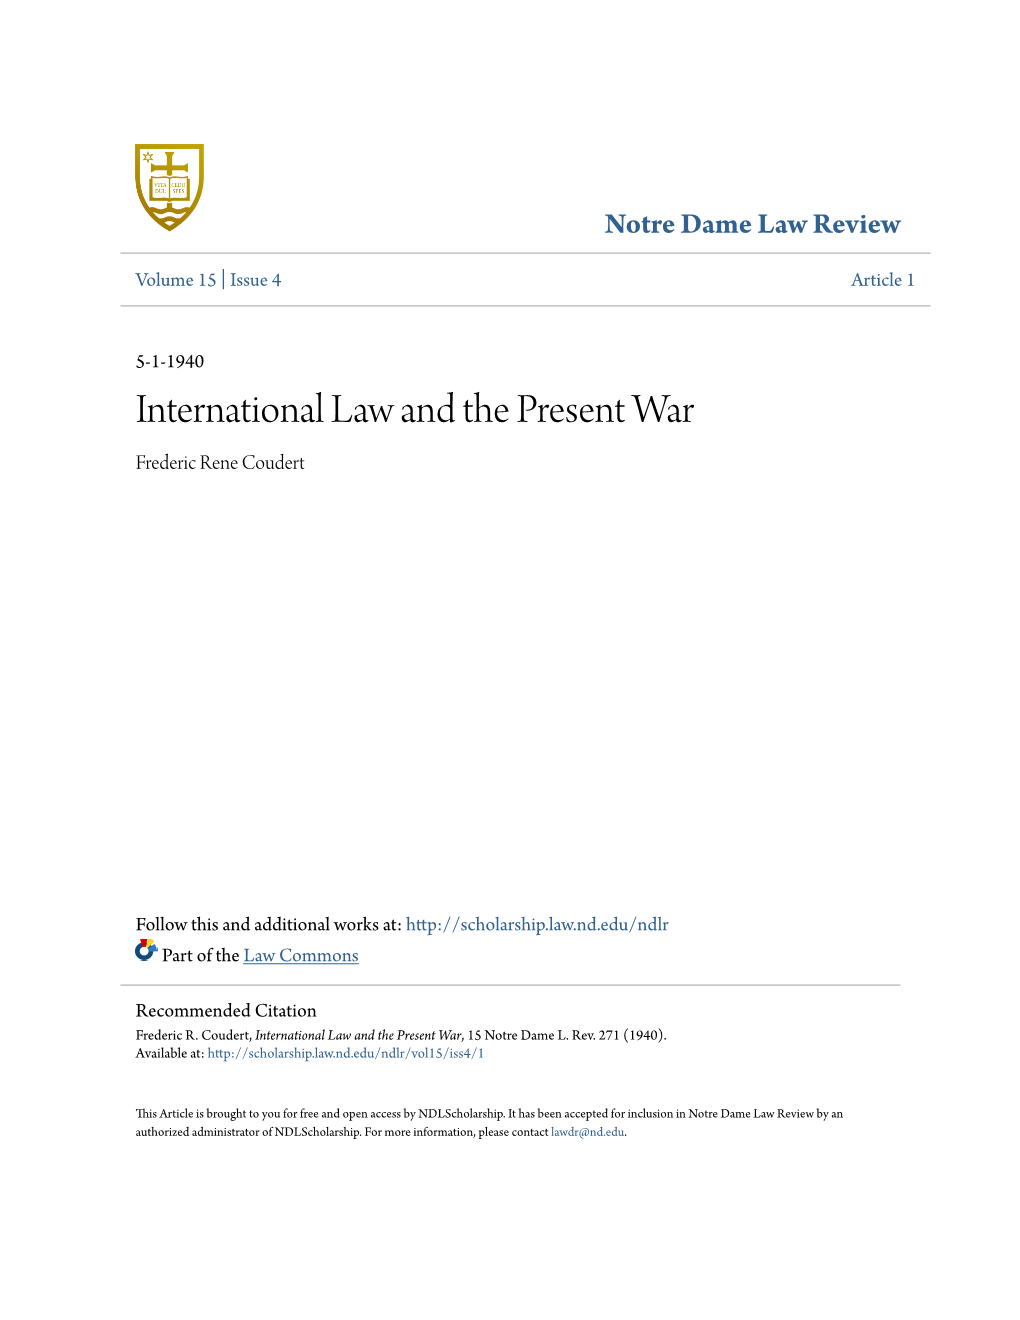 International Law and the Present War Frederic Rene Coudert